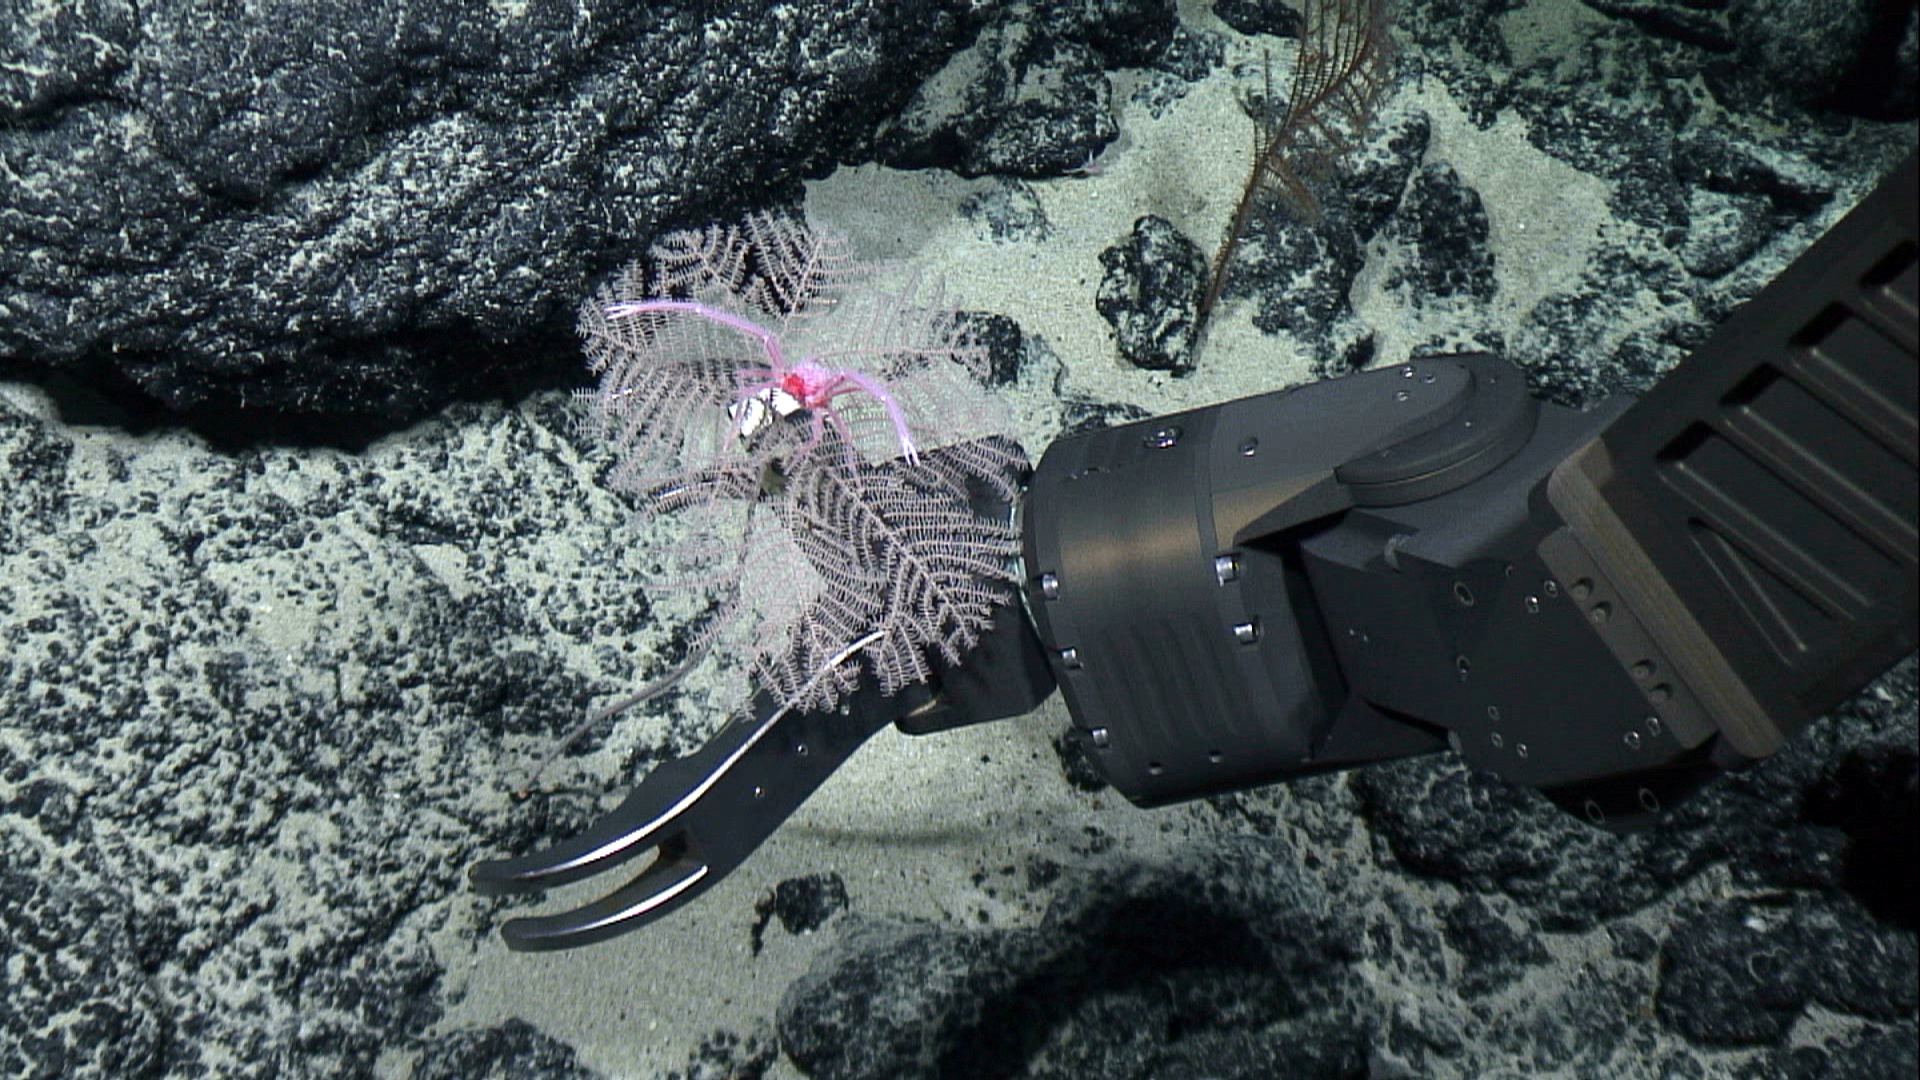  Black coral species Umbellapathes litocrada is seen in this handout photo from 2015 obtained by Reuters on October 28, 2020. NOAA Office of Ocean Exploration/Handout via REUTERS  